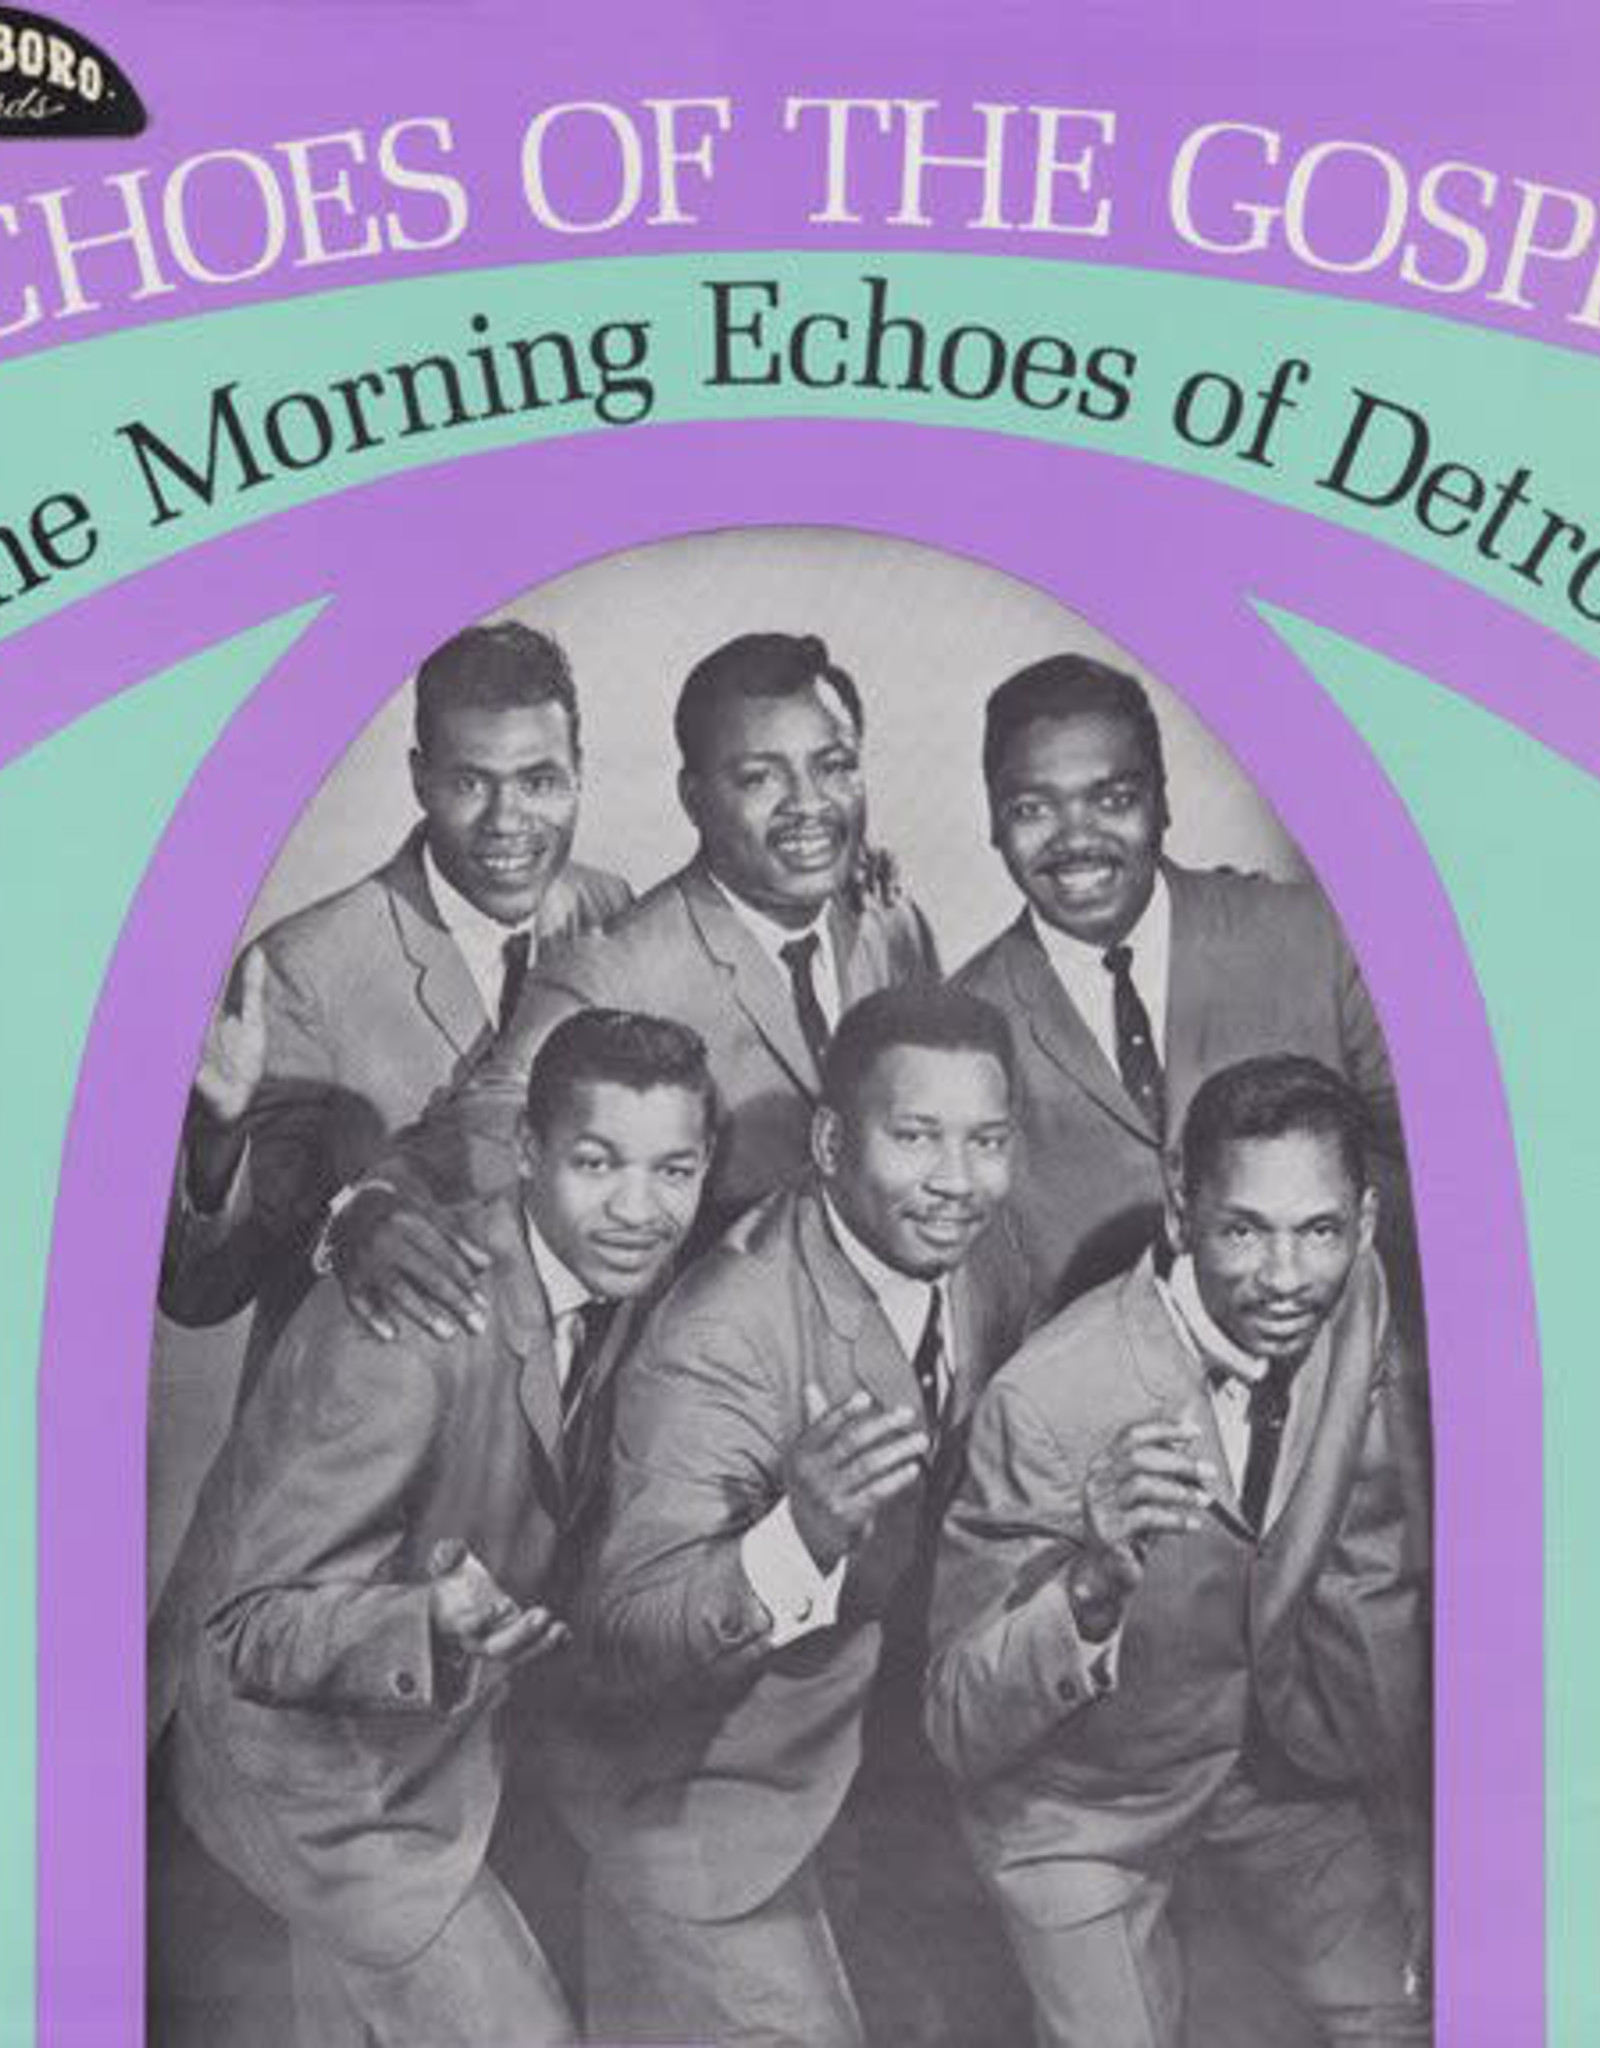 The Morning Echoes Of Detroit - Echoes Of The Gospel